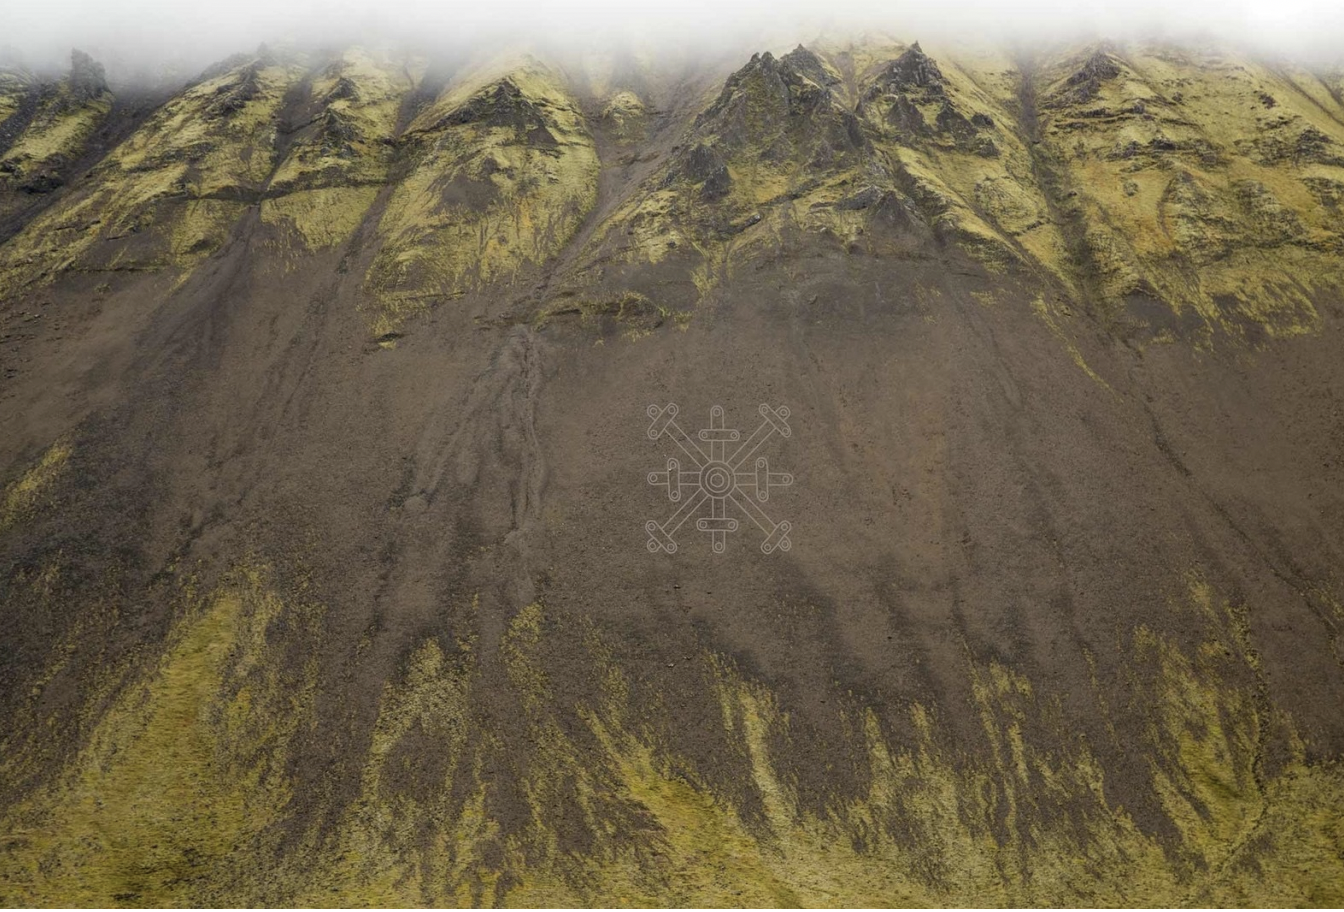 To open hills. From the Iceland Runes project